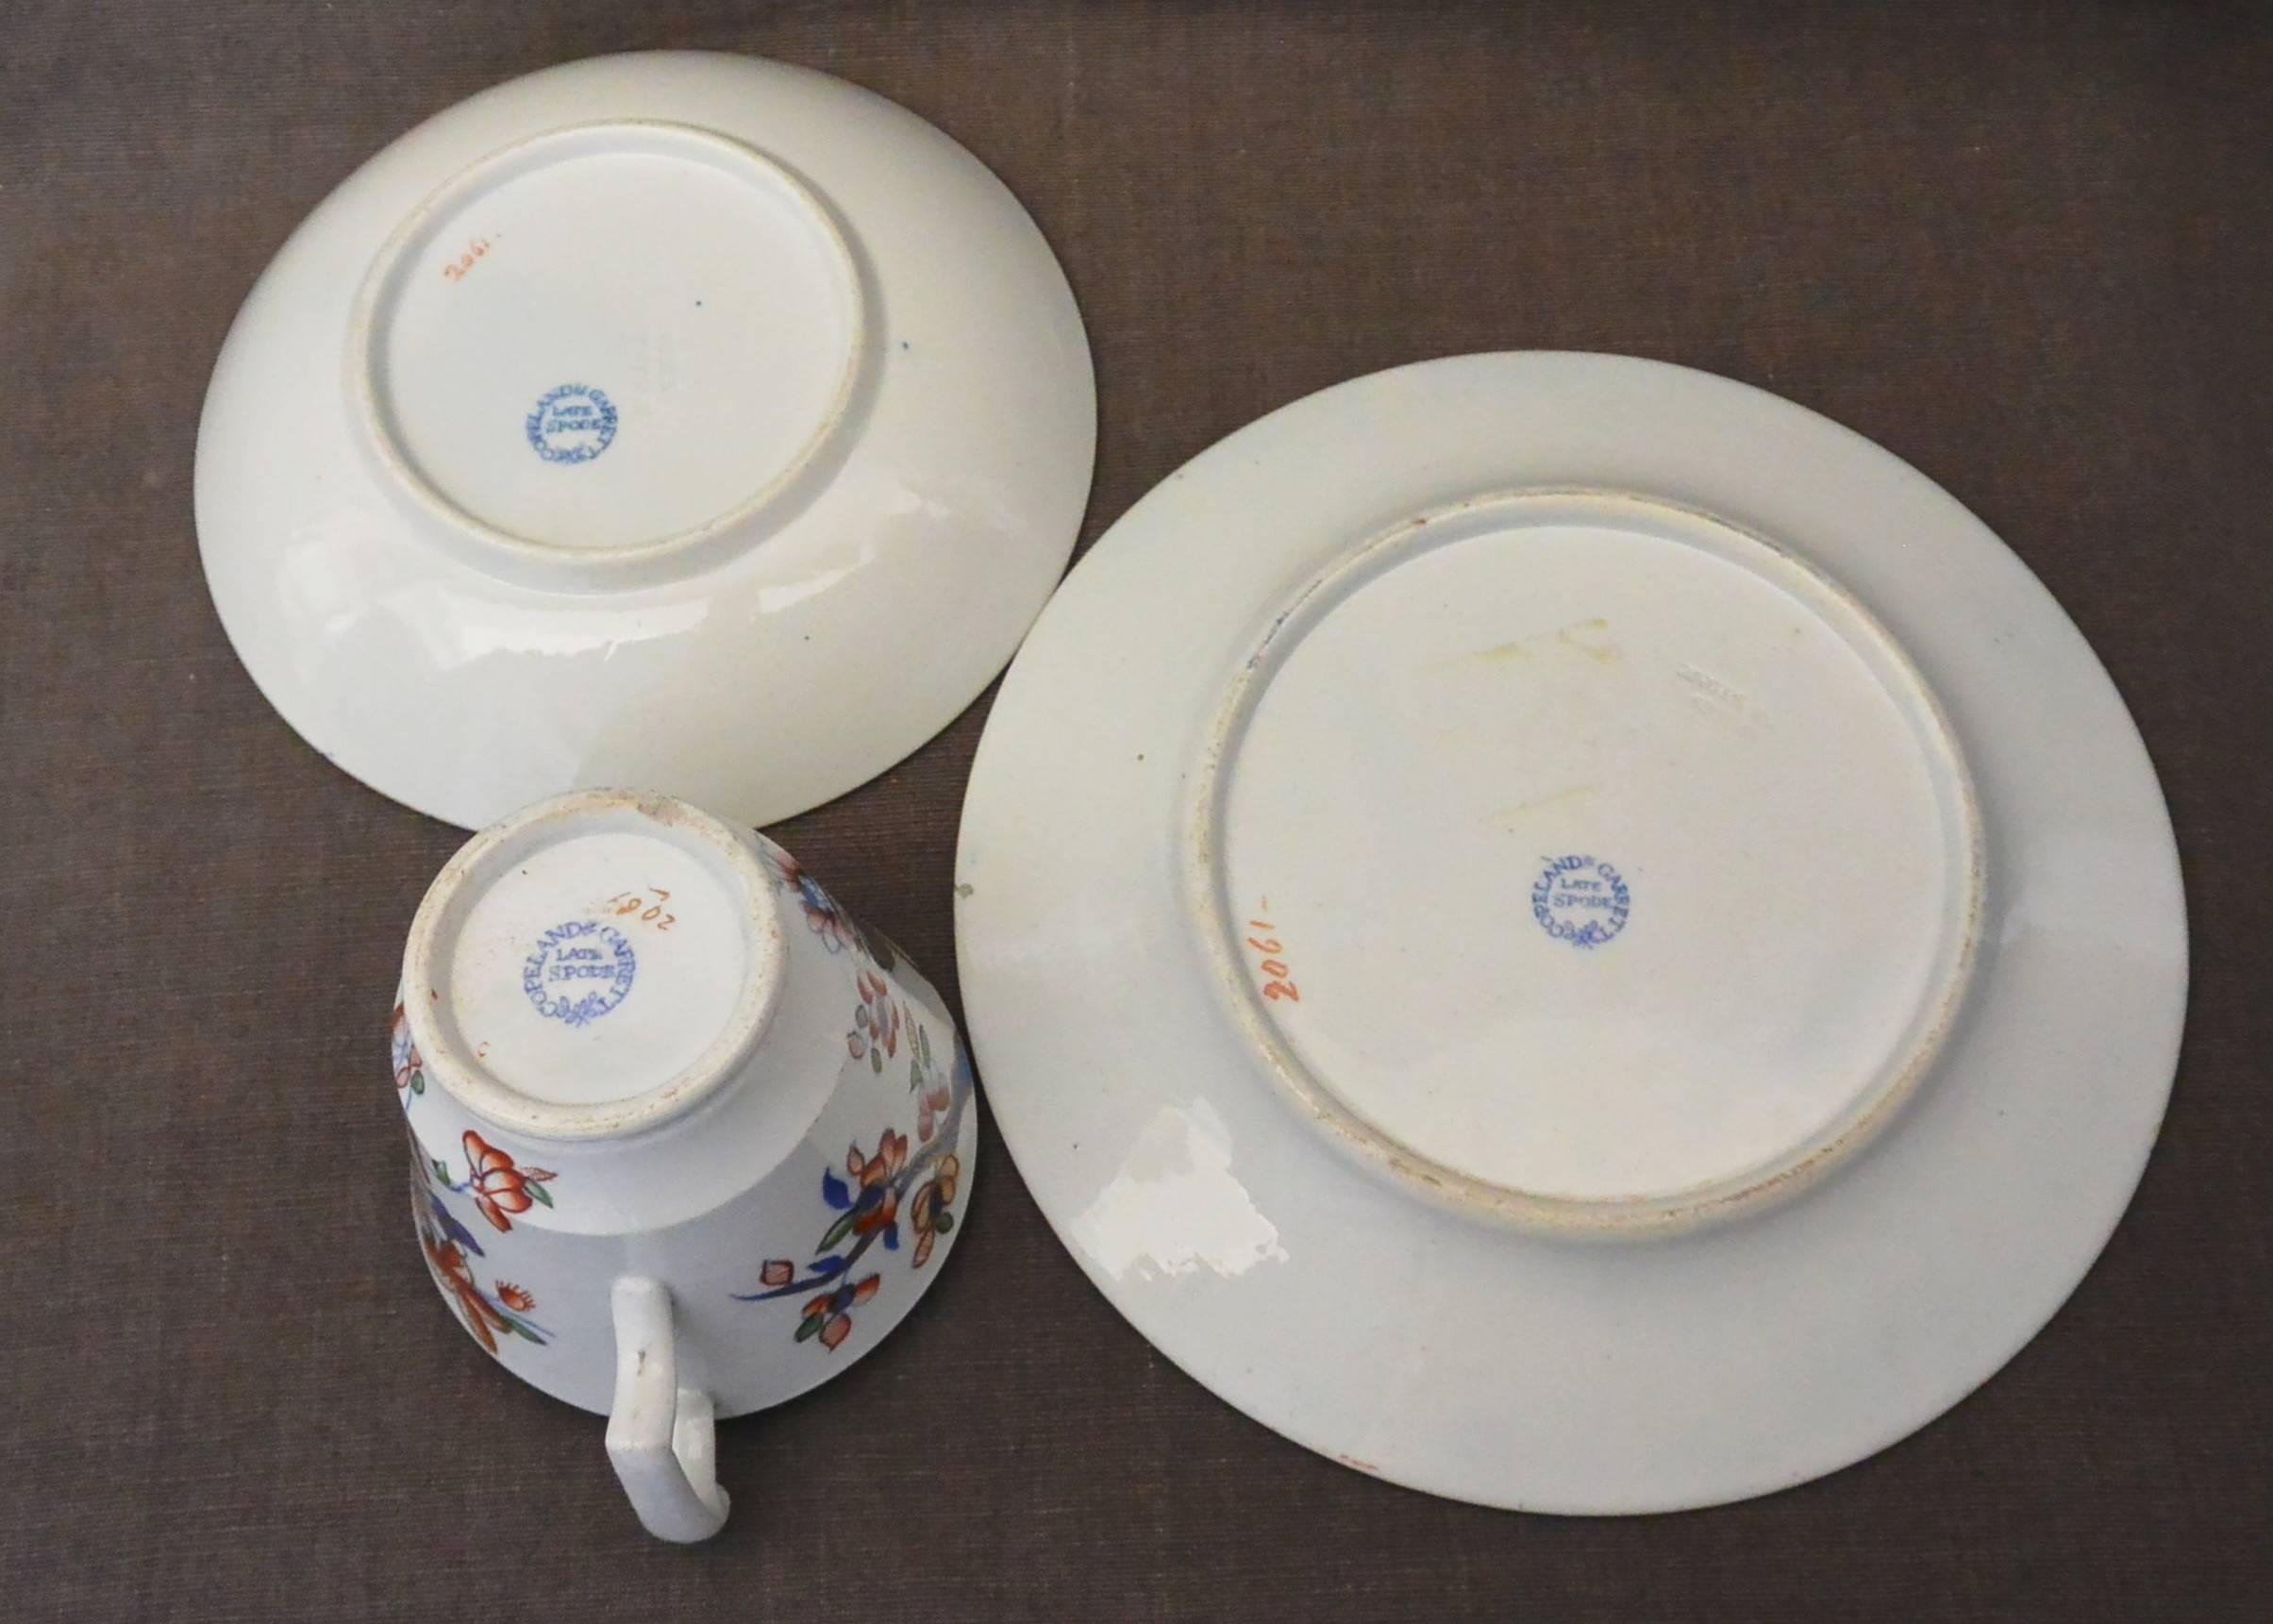  Tobacco Leaf Pattern Plate, Cup and Saucer In Good Condition For Sale In New York, NY